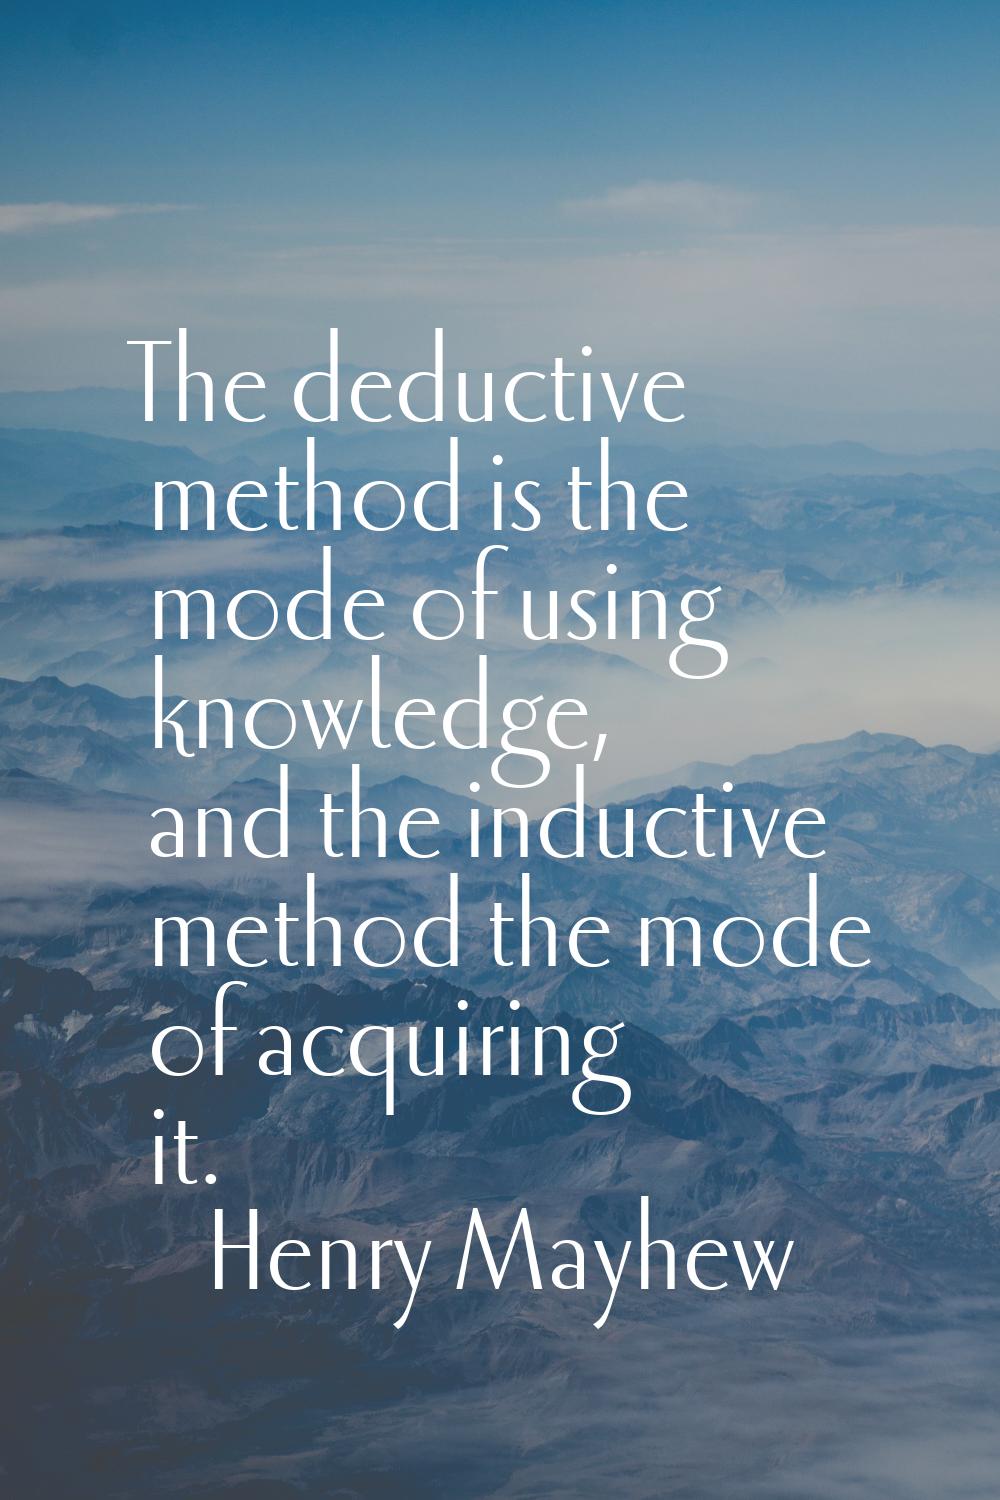 The deductive method is the mode of using knowledge, and the inductive method the mode of acquiring